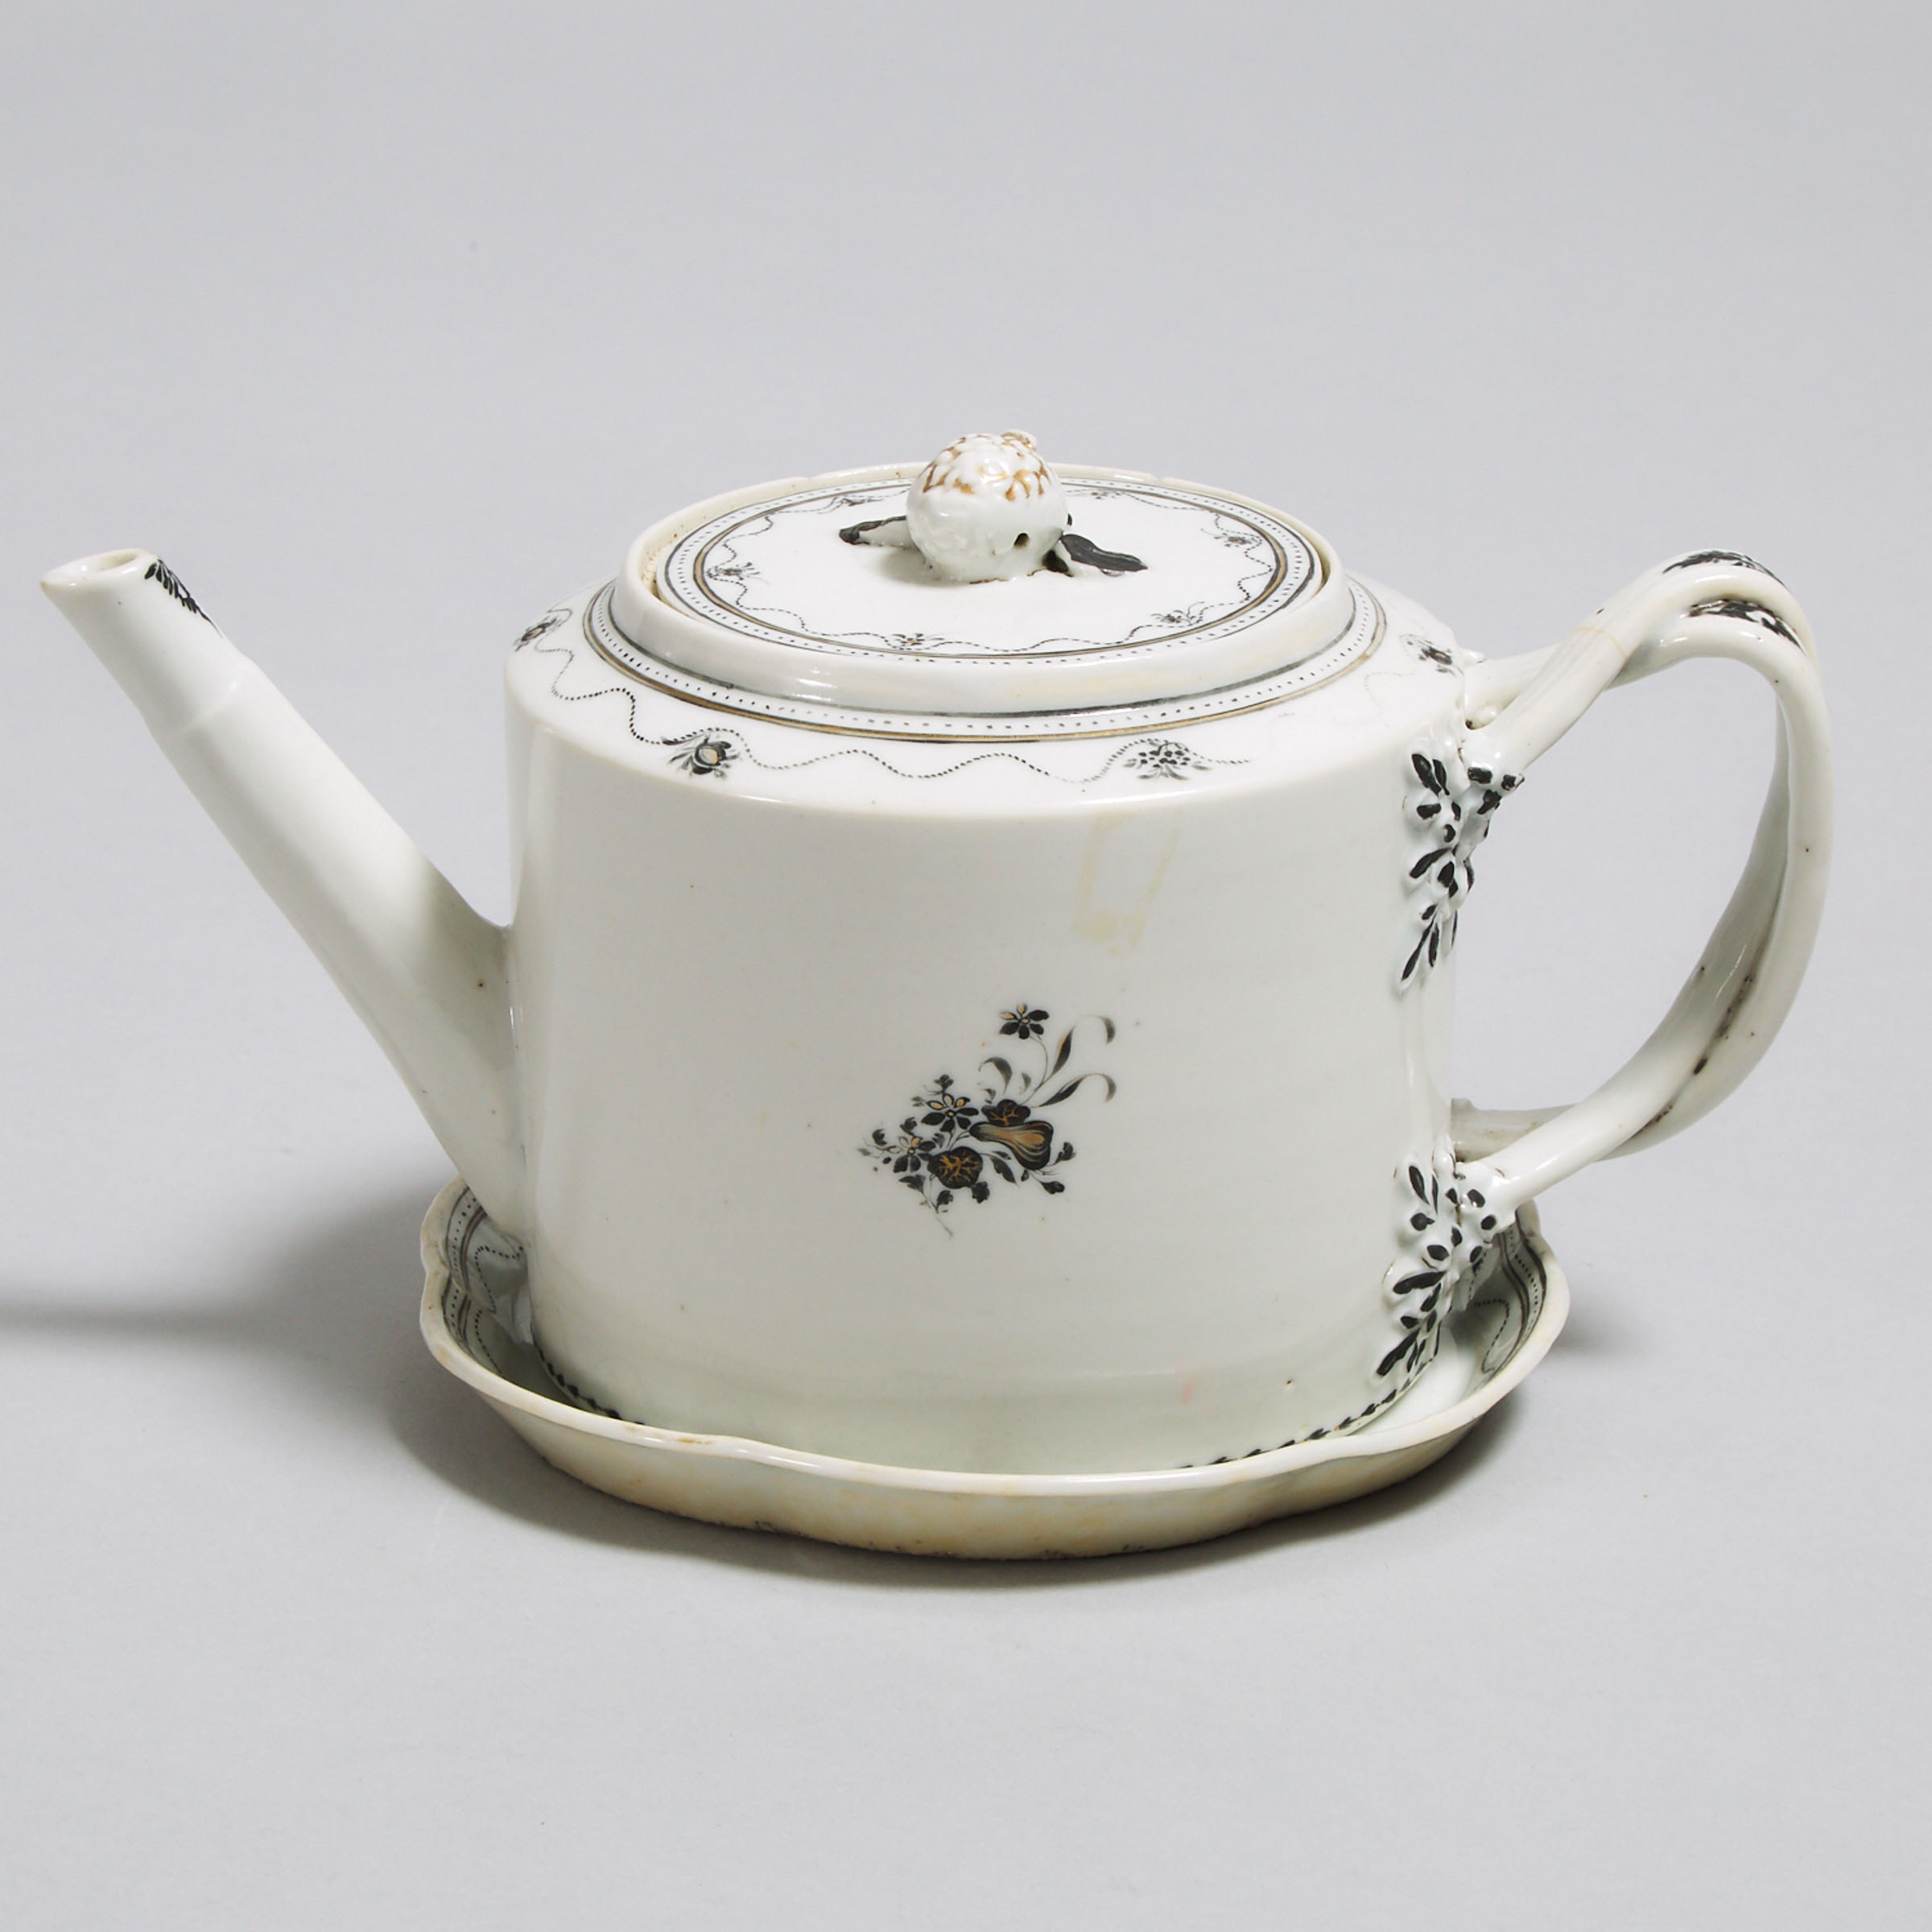 Chinese Export Teapot with Stand, c.1780